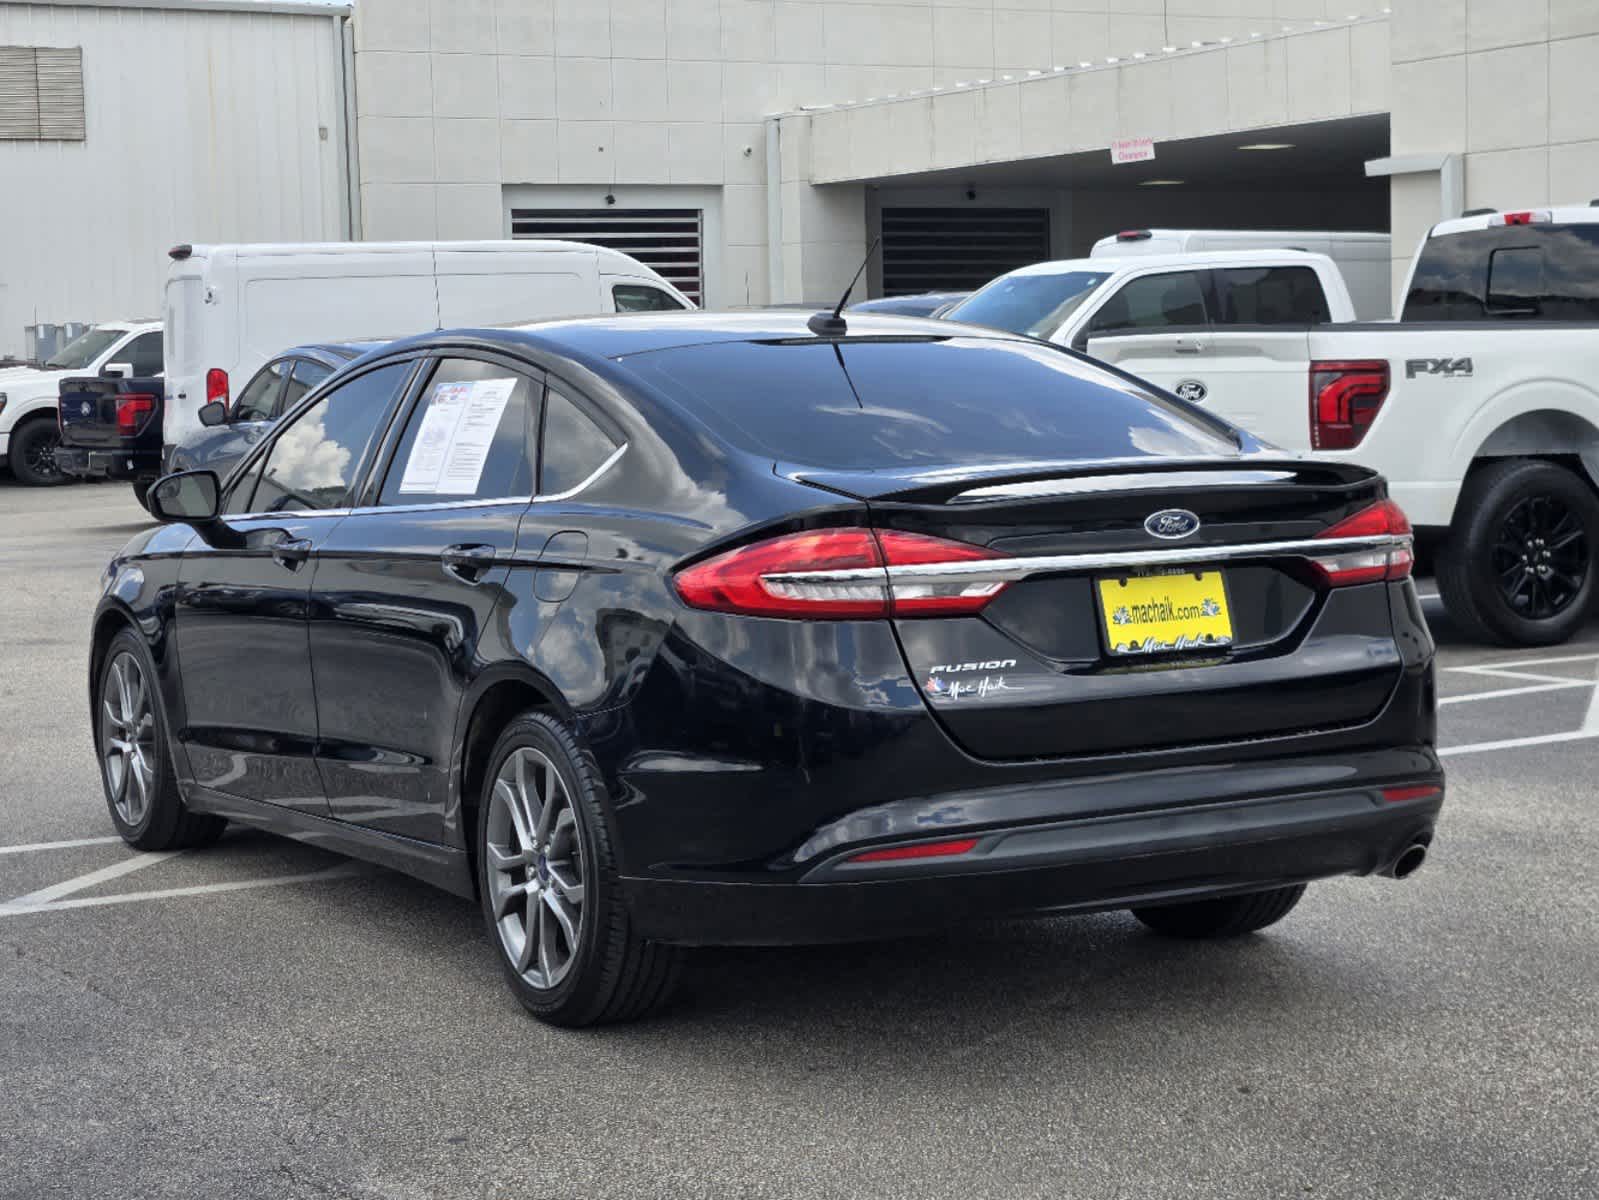 2017 Ford Fusion S 4